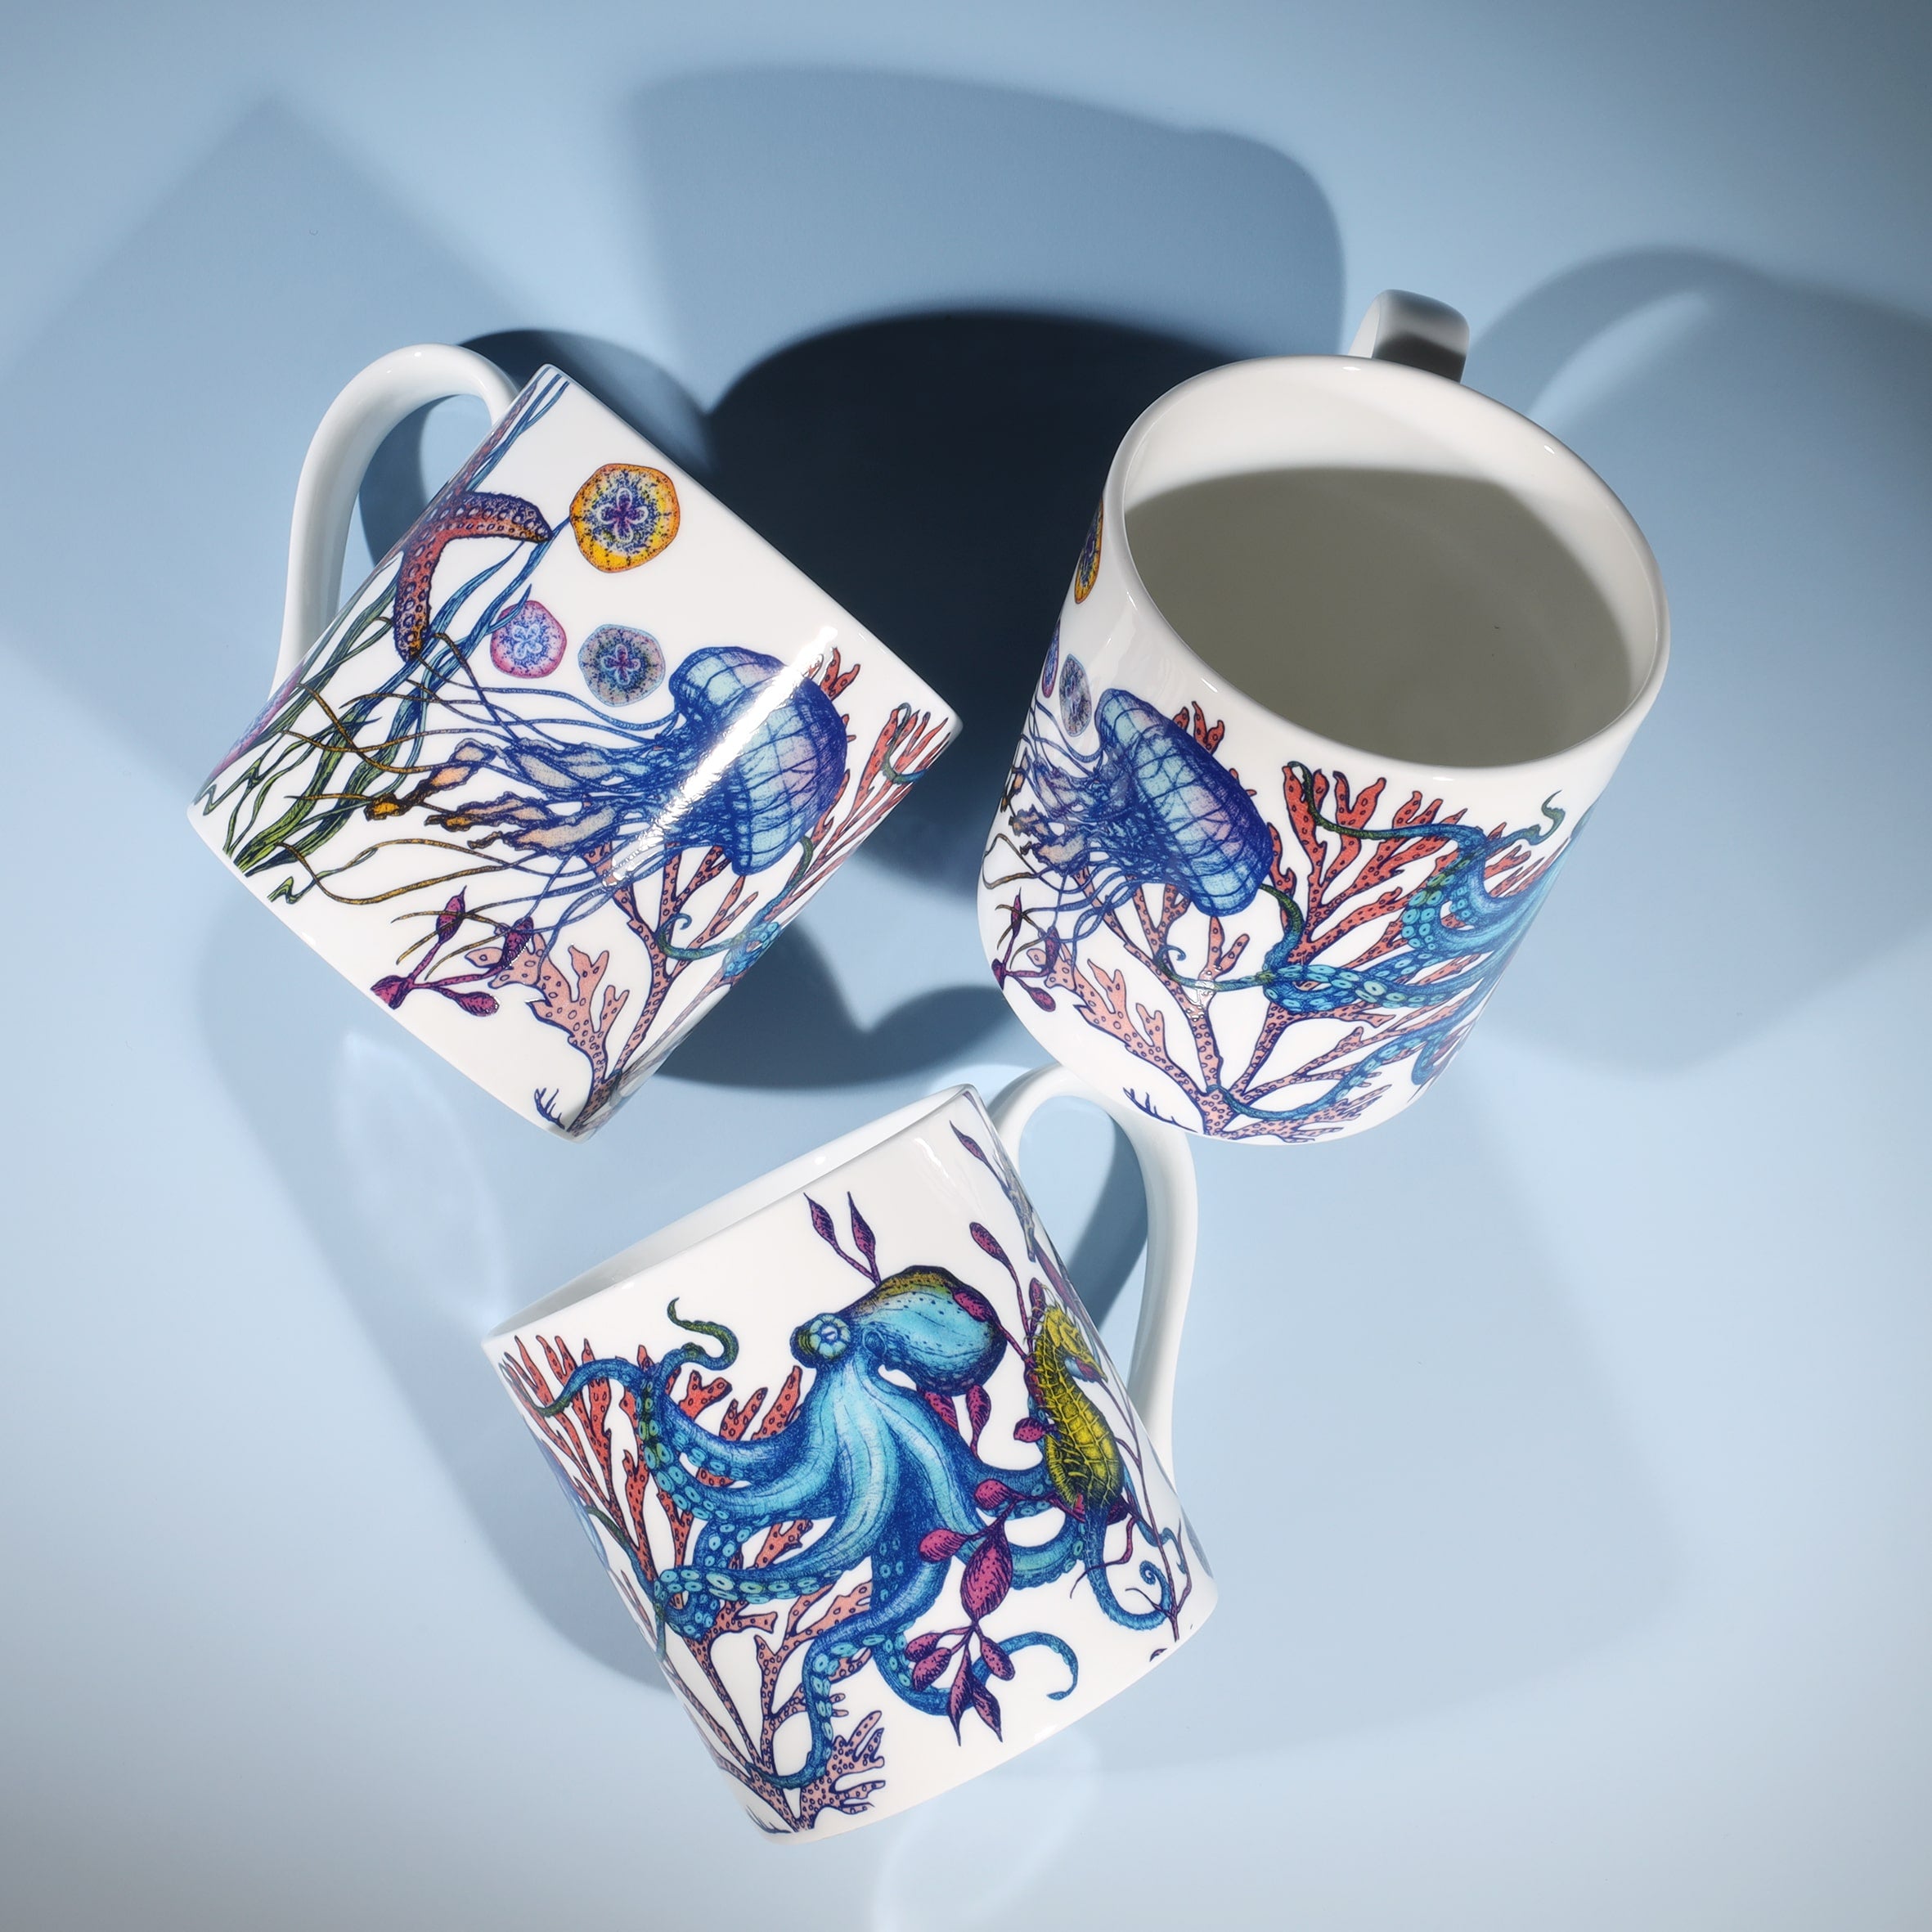 Shown from above is an Image of three bone china mugs featuring an underwater Reef Design with Octopus, Jellyfish and Starfish 